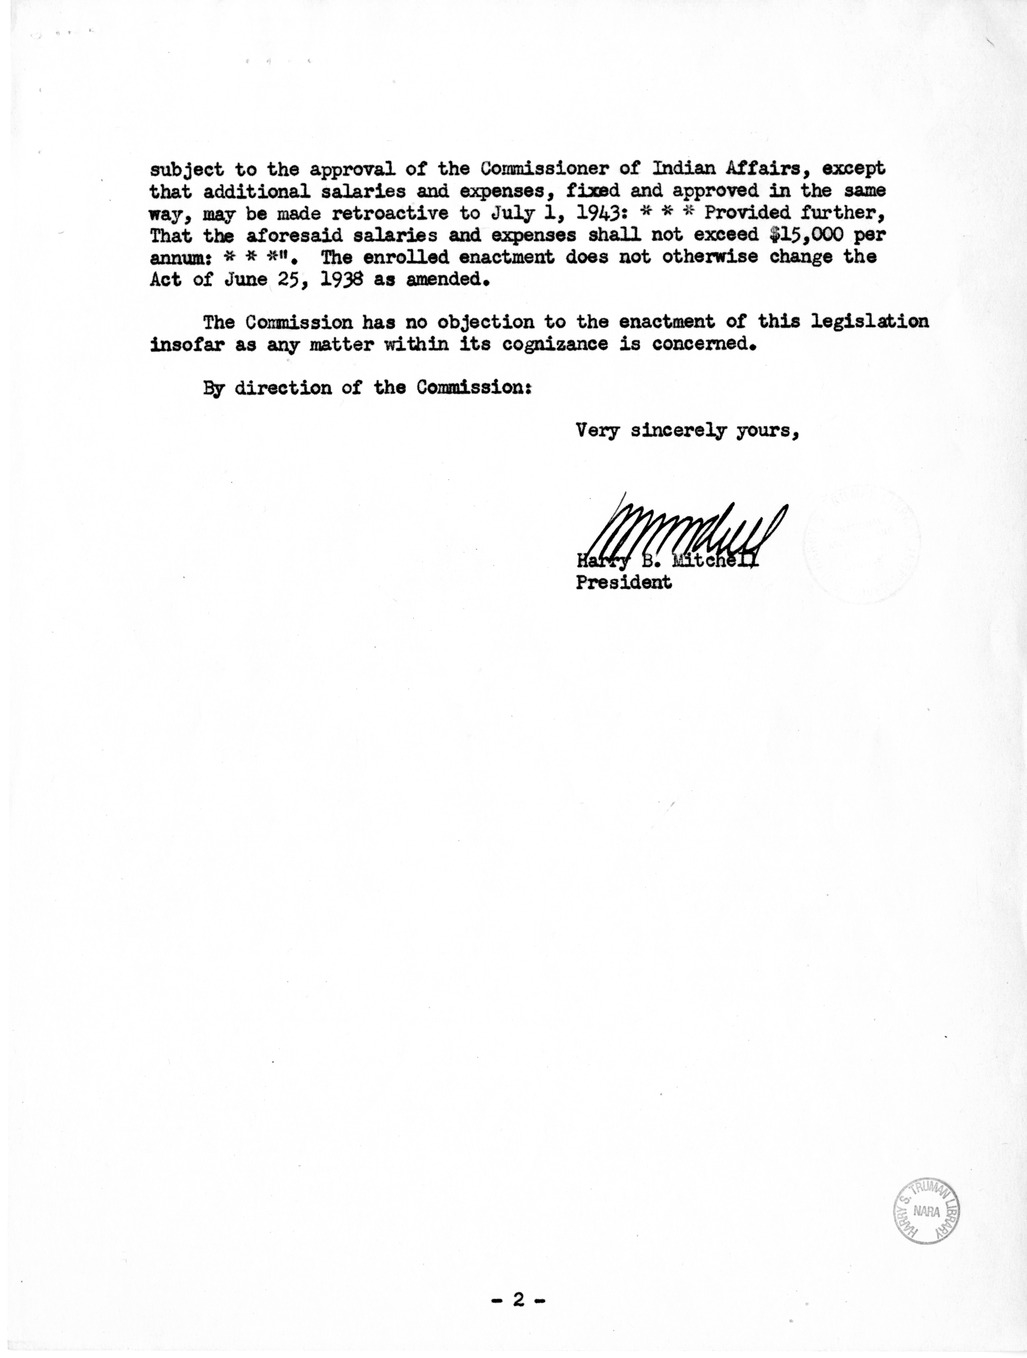 Memorandum from Frederick J. Bailey to M. C. Latta, S. 655, Amending the Act of June 25, 1938 (52 Stat. 1207) Authorizing the Secretary of the Interior to Pay Salary and Expenses of the Chairman, Secretary, and Interpreter of the Klamath General Council, 